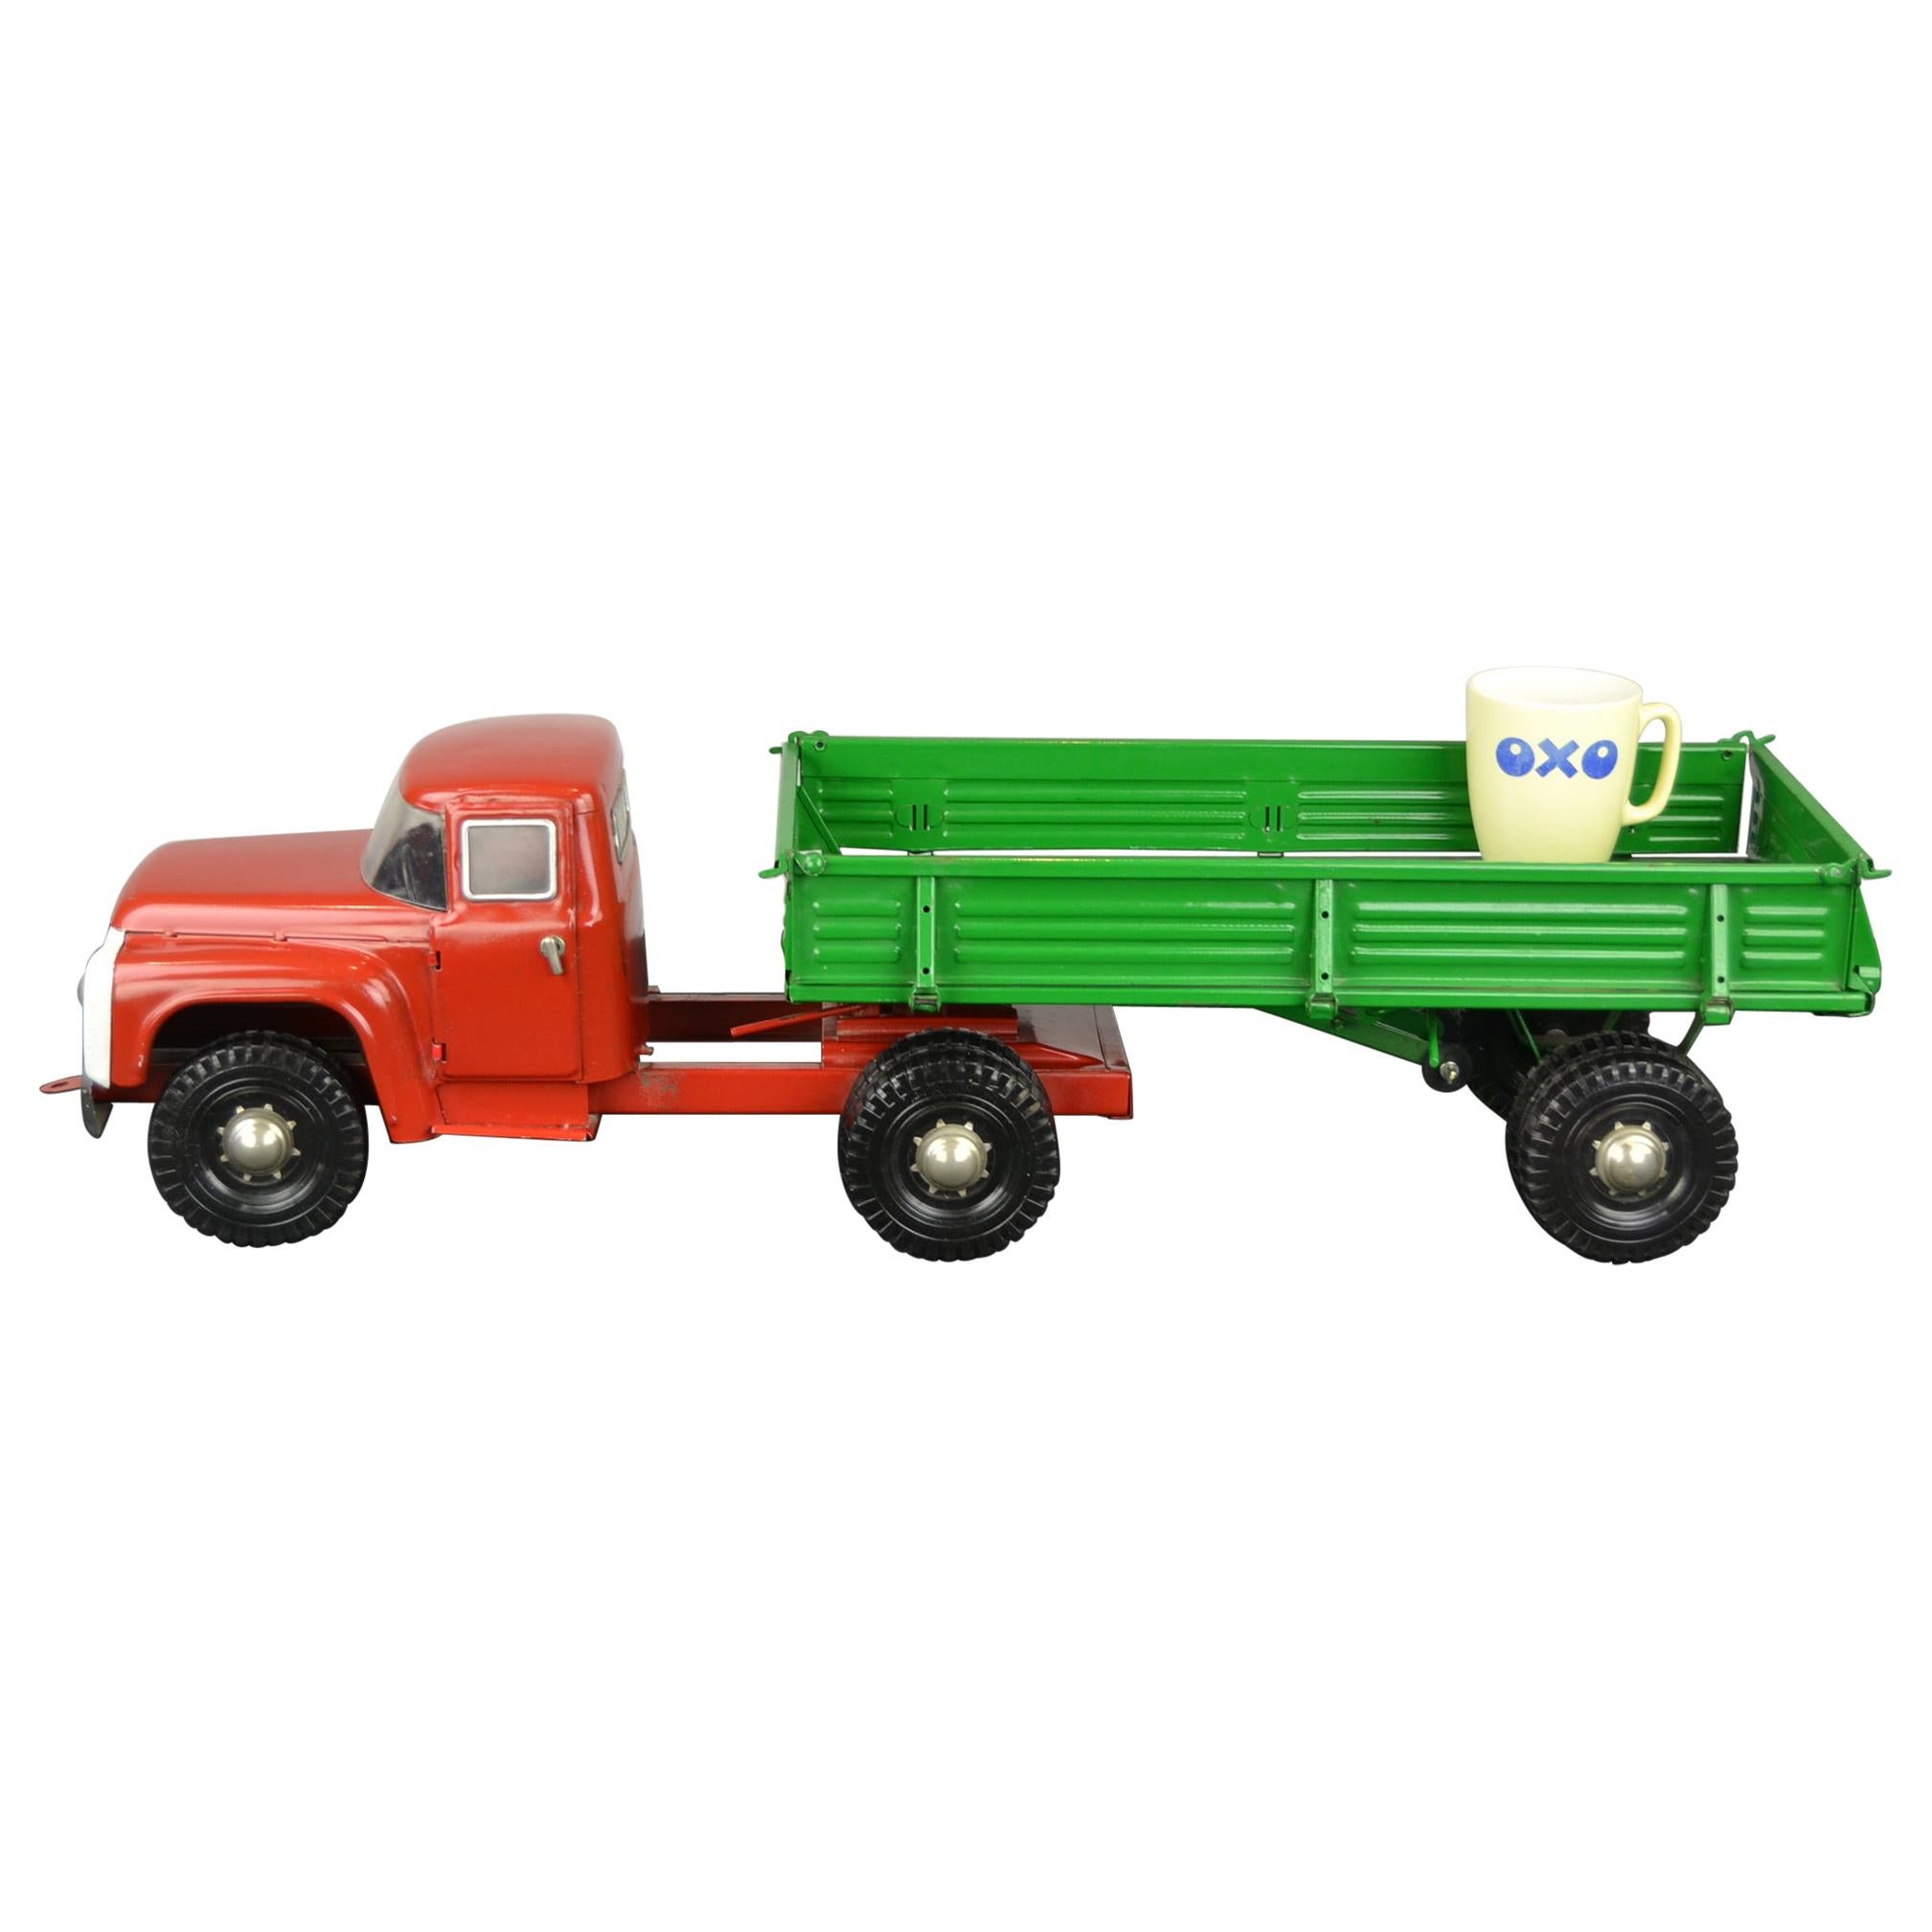 Large Semi-Trailer Metal Truck Toy, USSR, 1990s